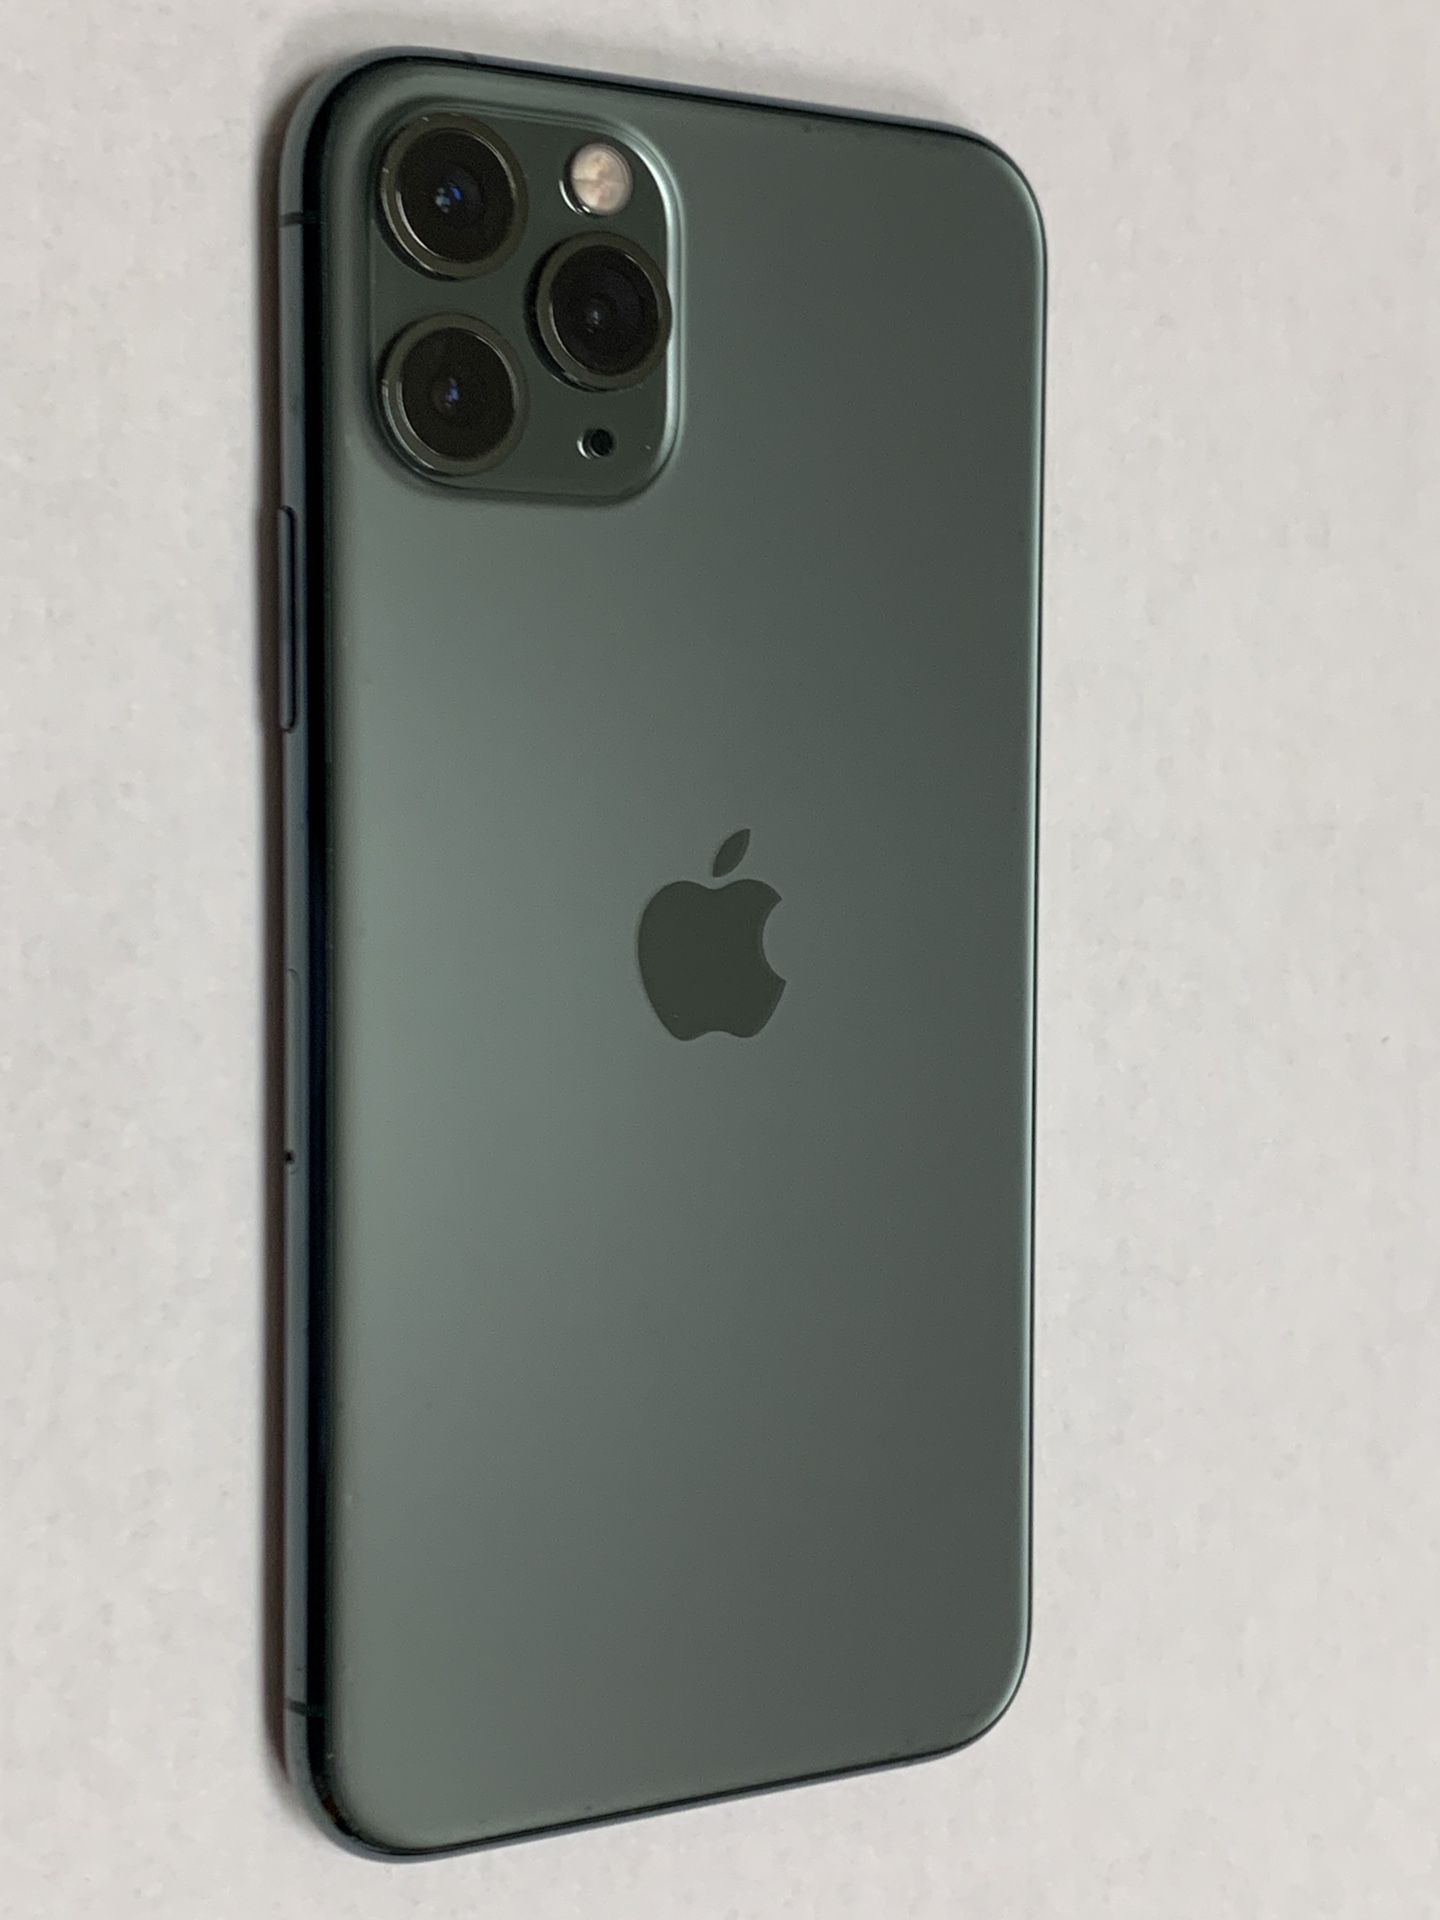 Excellent UNLOCKED iPhone 11 PRO 256gb Works With Any Company. Att, T-Mobile, metro pcs, cricket, Verizon and Overseas. Charger and cable included.